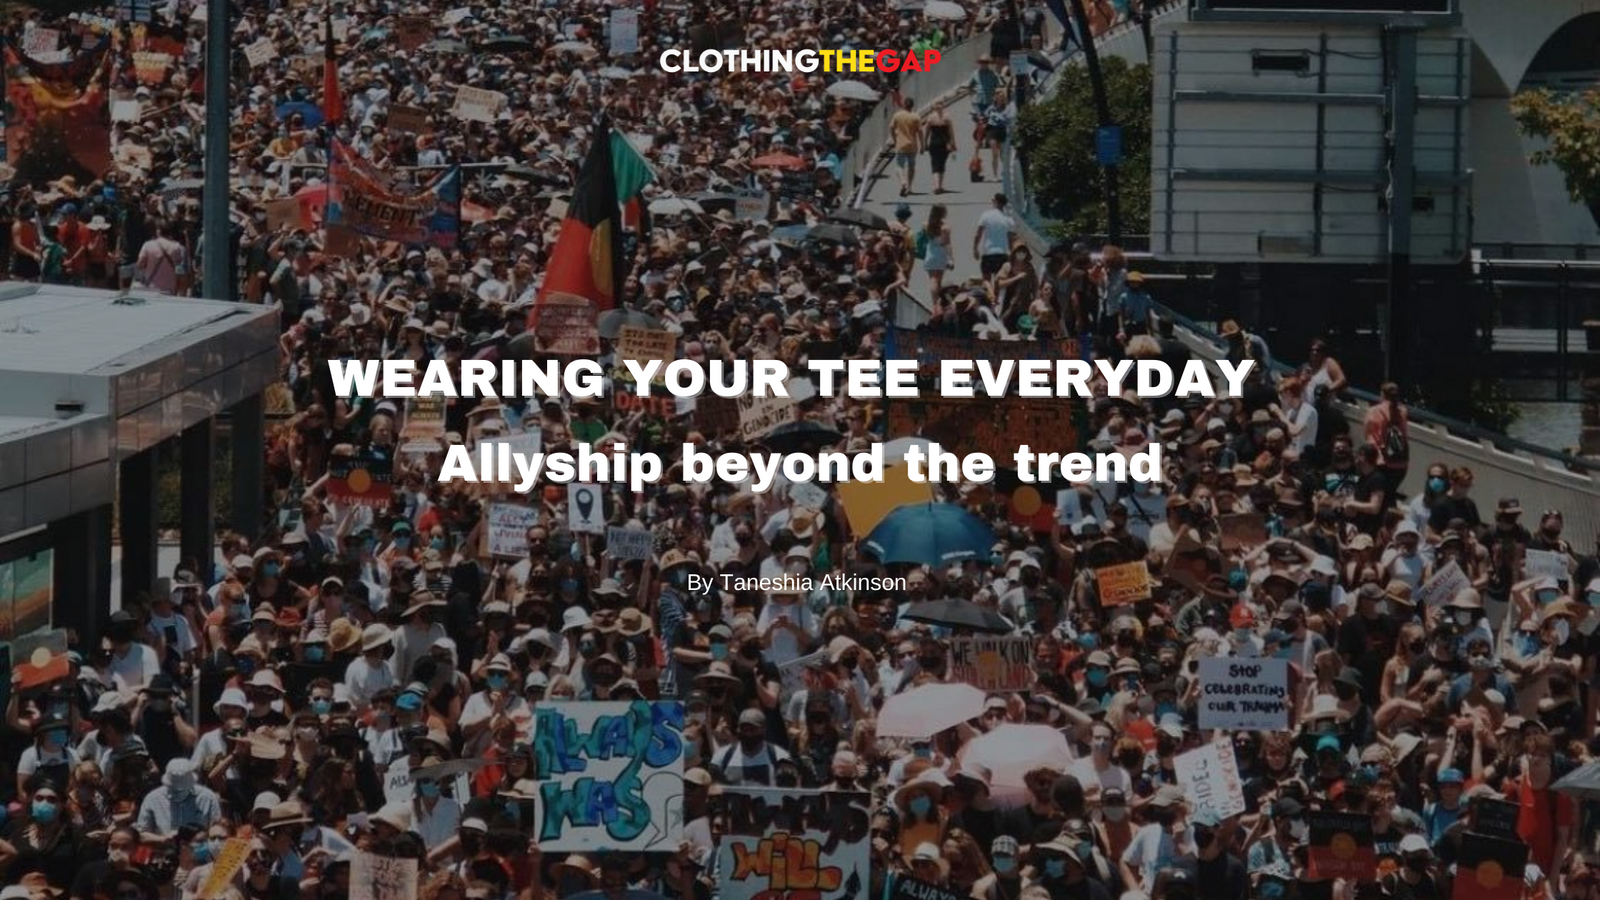 Wearing your tee every day: Allyship beyond the trend